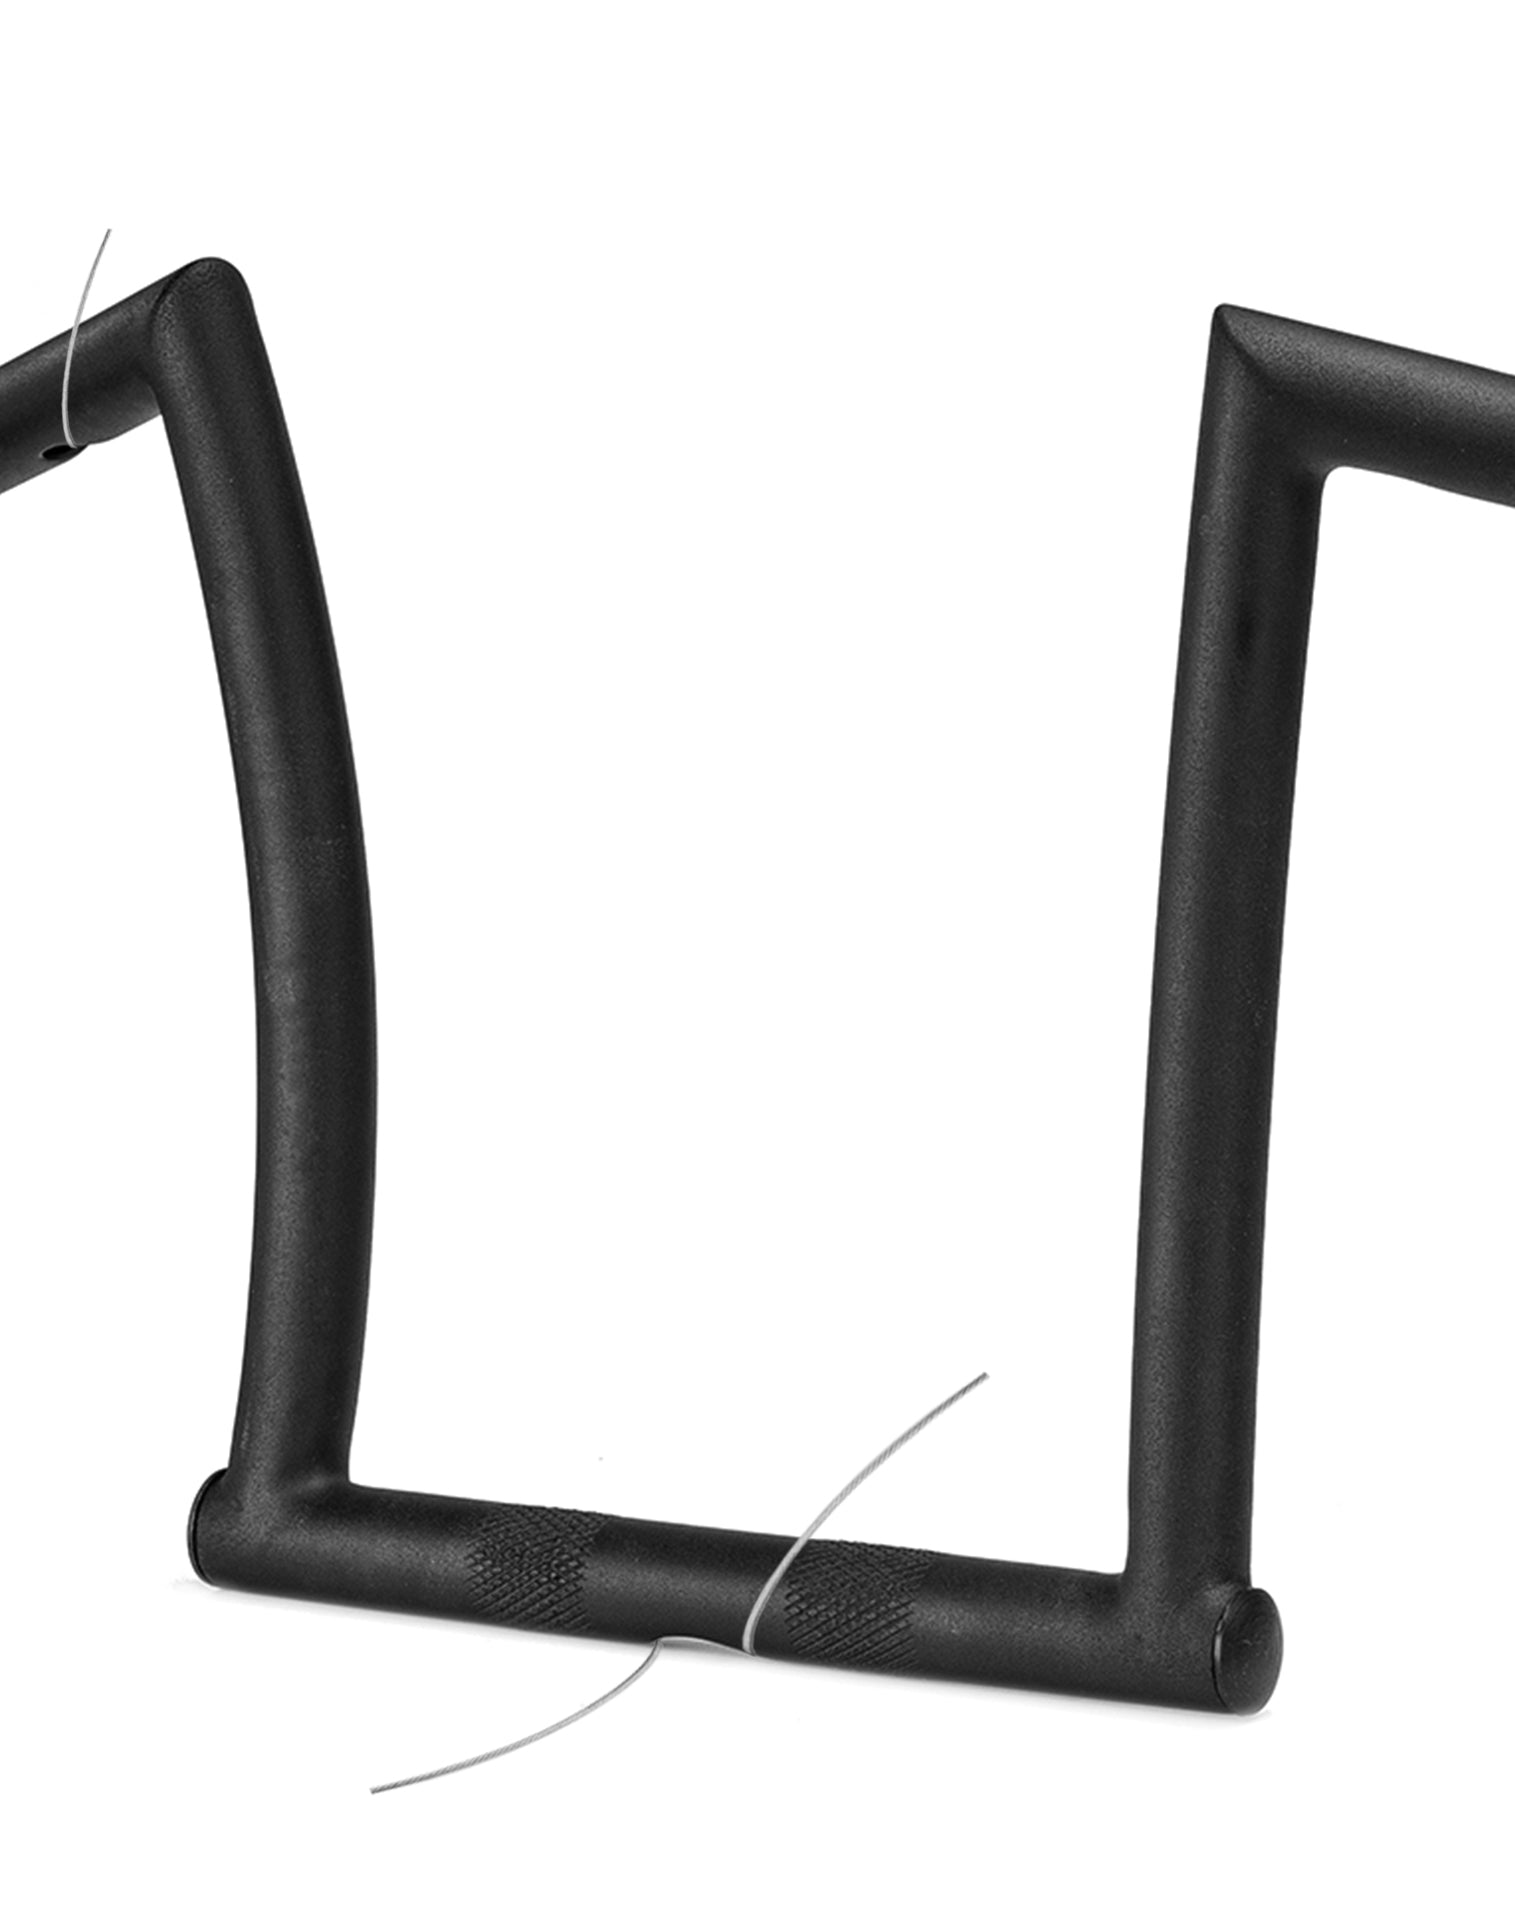 Viking Iron Born 9" Handlebar for Harley Dyna Wide Glide FXDWG Matte Black Close up View